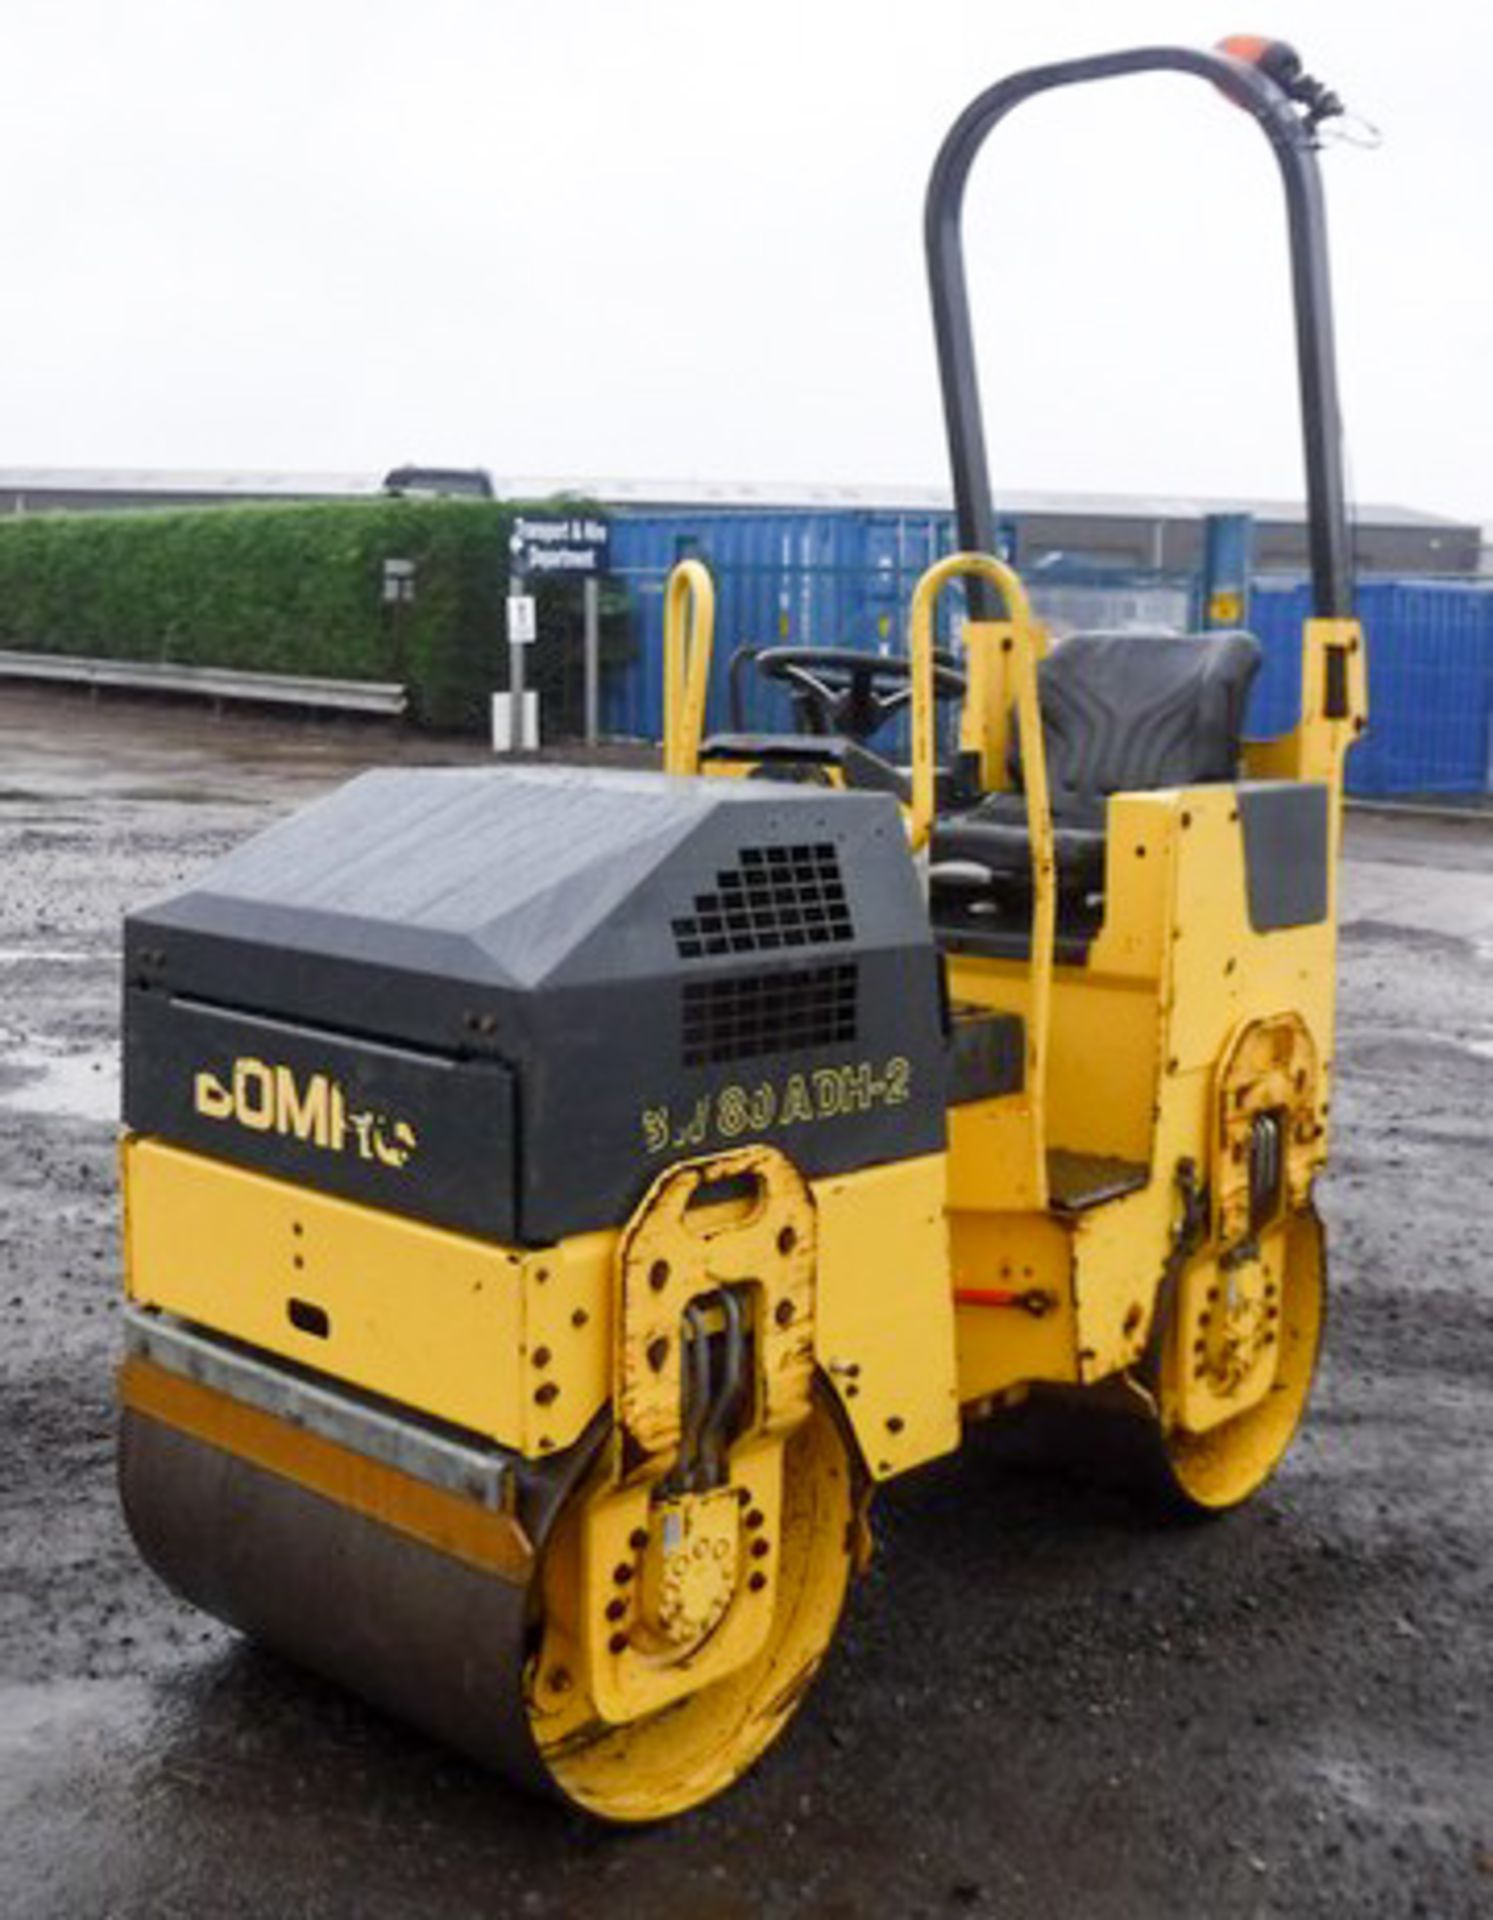 BOMAG BW80 ADH-2 roller. S/N 101460426169. 585hrs (not verified)